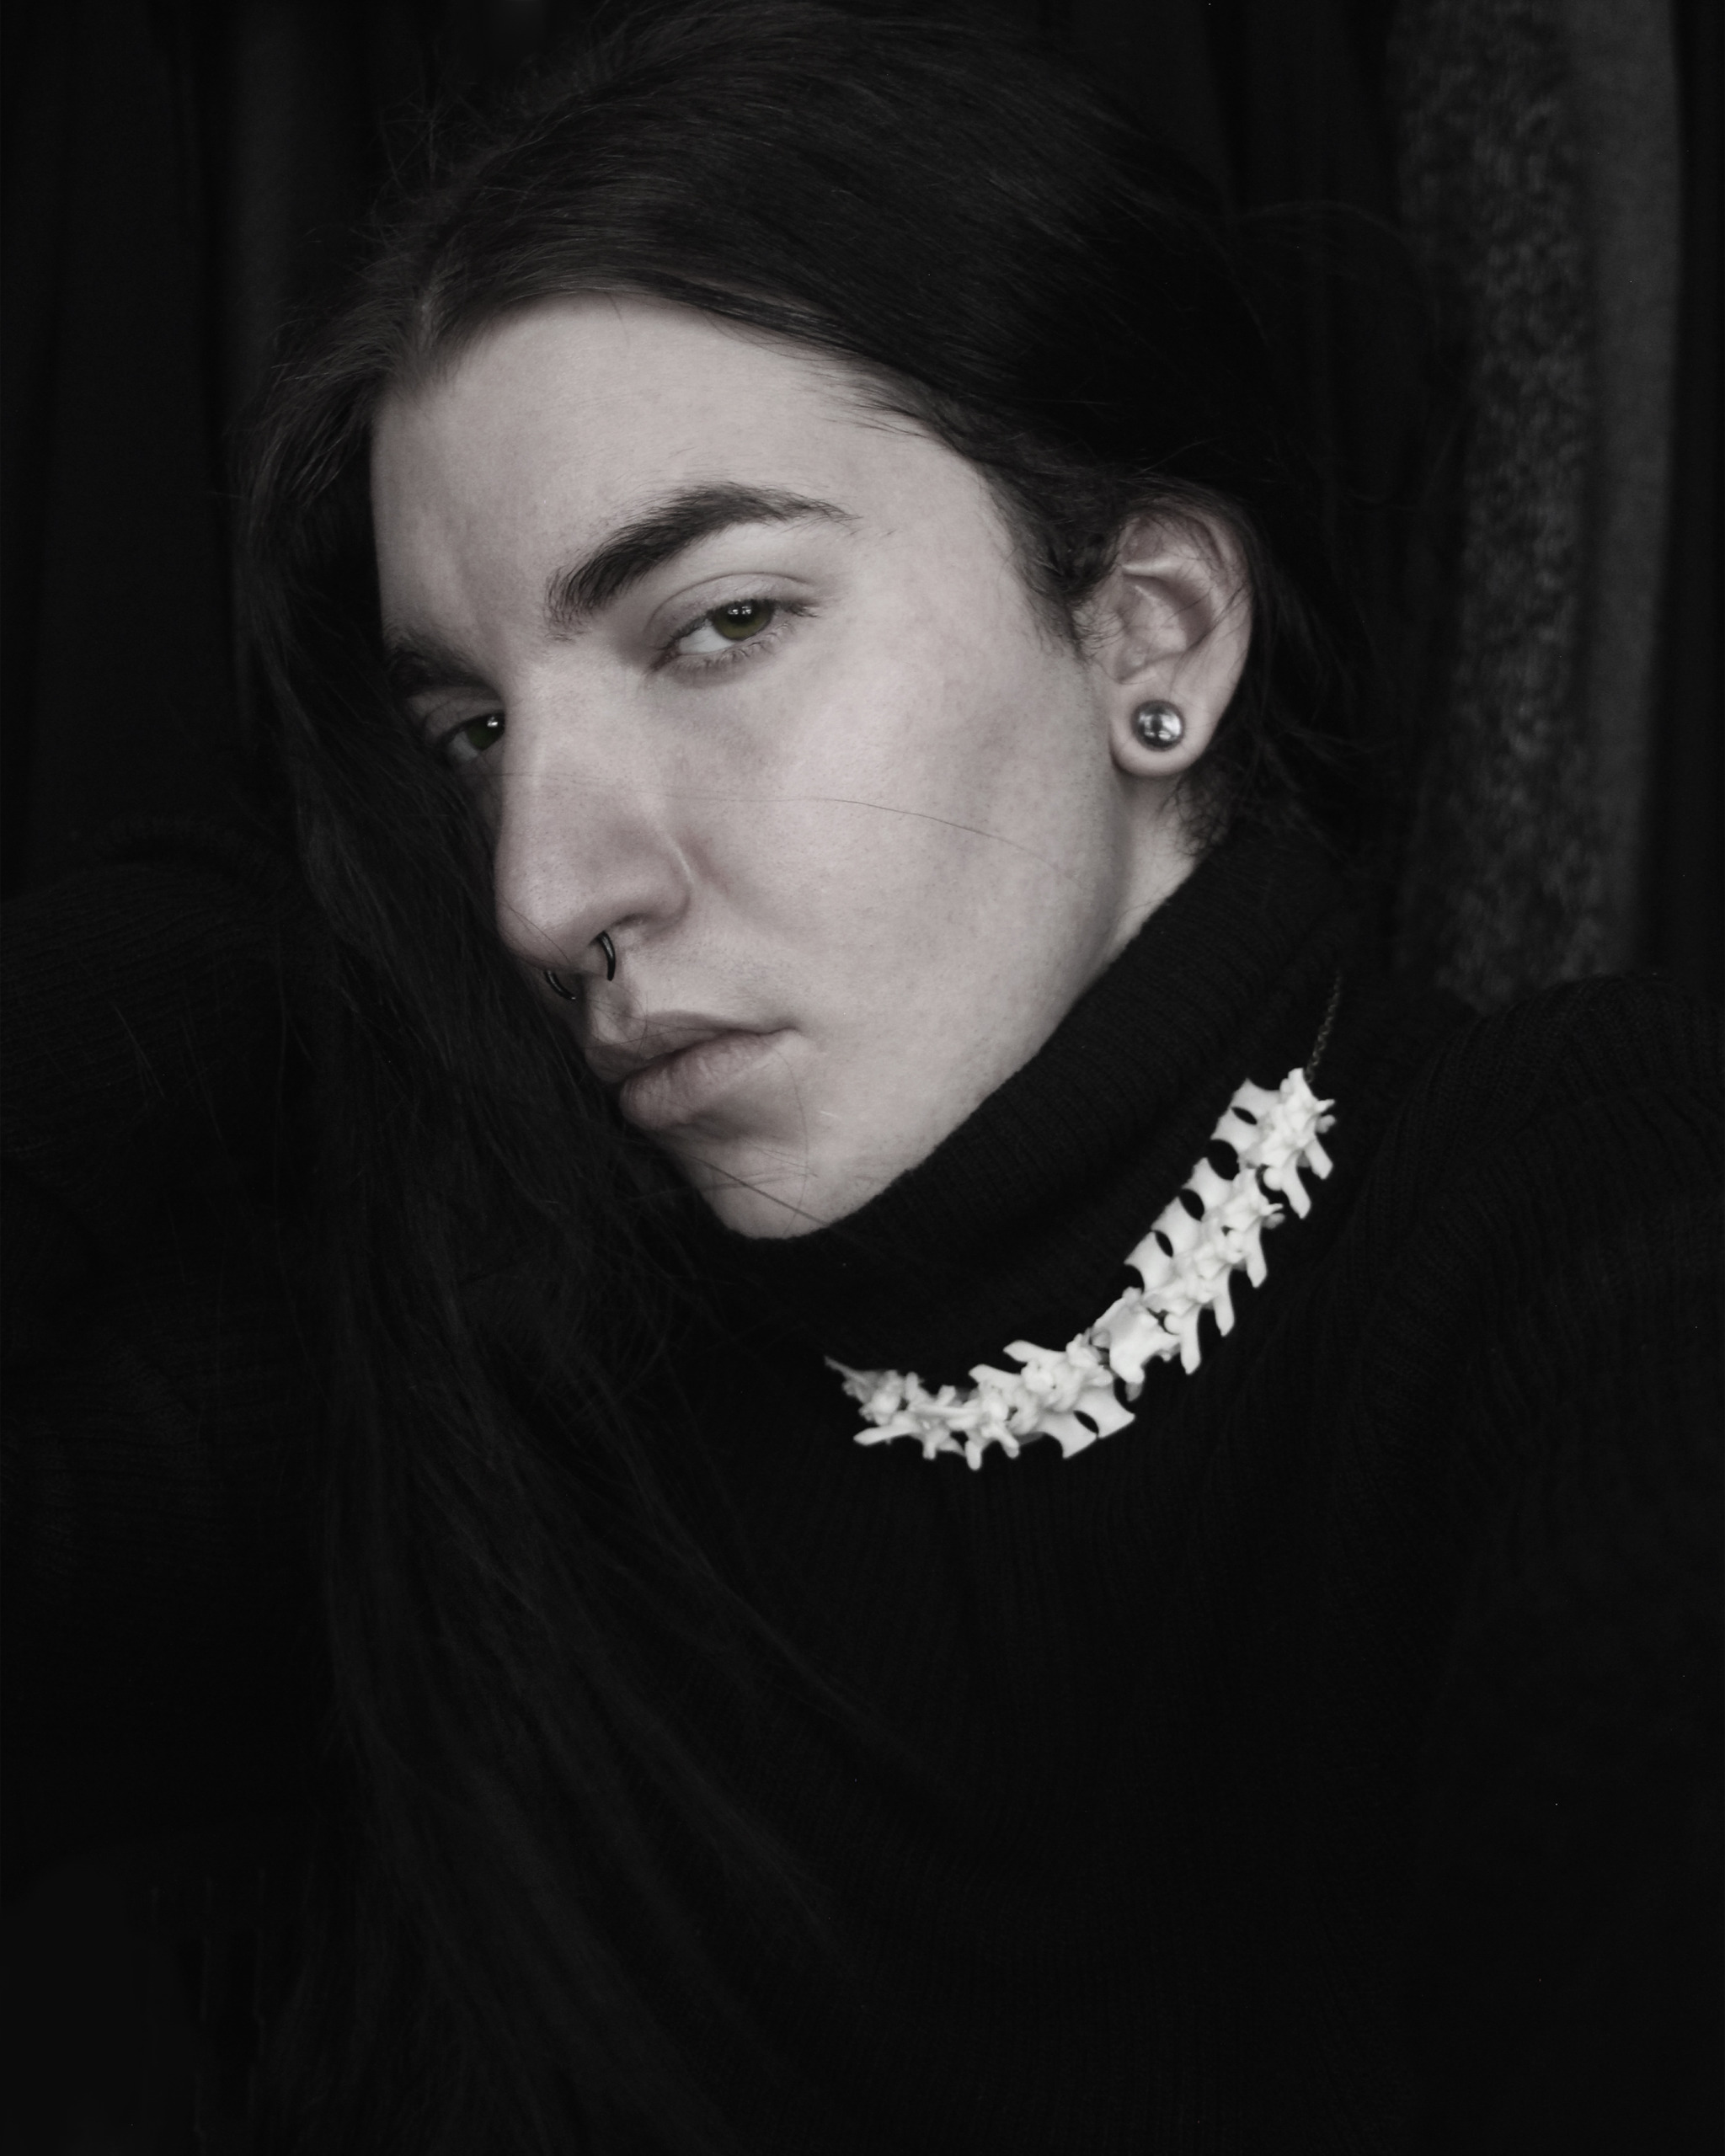 ᴠᴇʀᴛᴇʙʀᴀᴇ I somehow haven’t shared this necklace Skog added to my collection last Yule season. Knowing of my affinity for snakes and that I collect vertebrae pieces, this was the perfect gift.[he/him] |  IG: Nekromancy